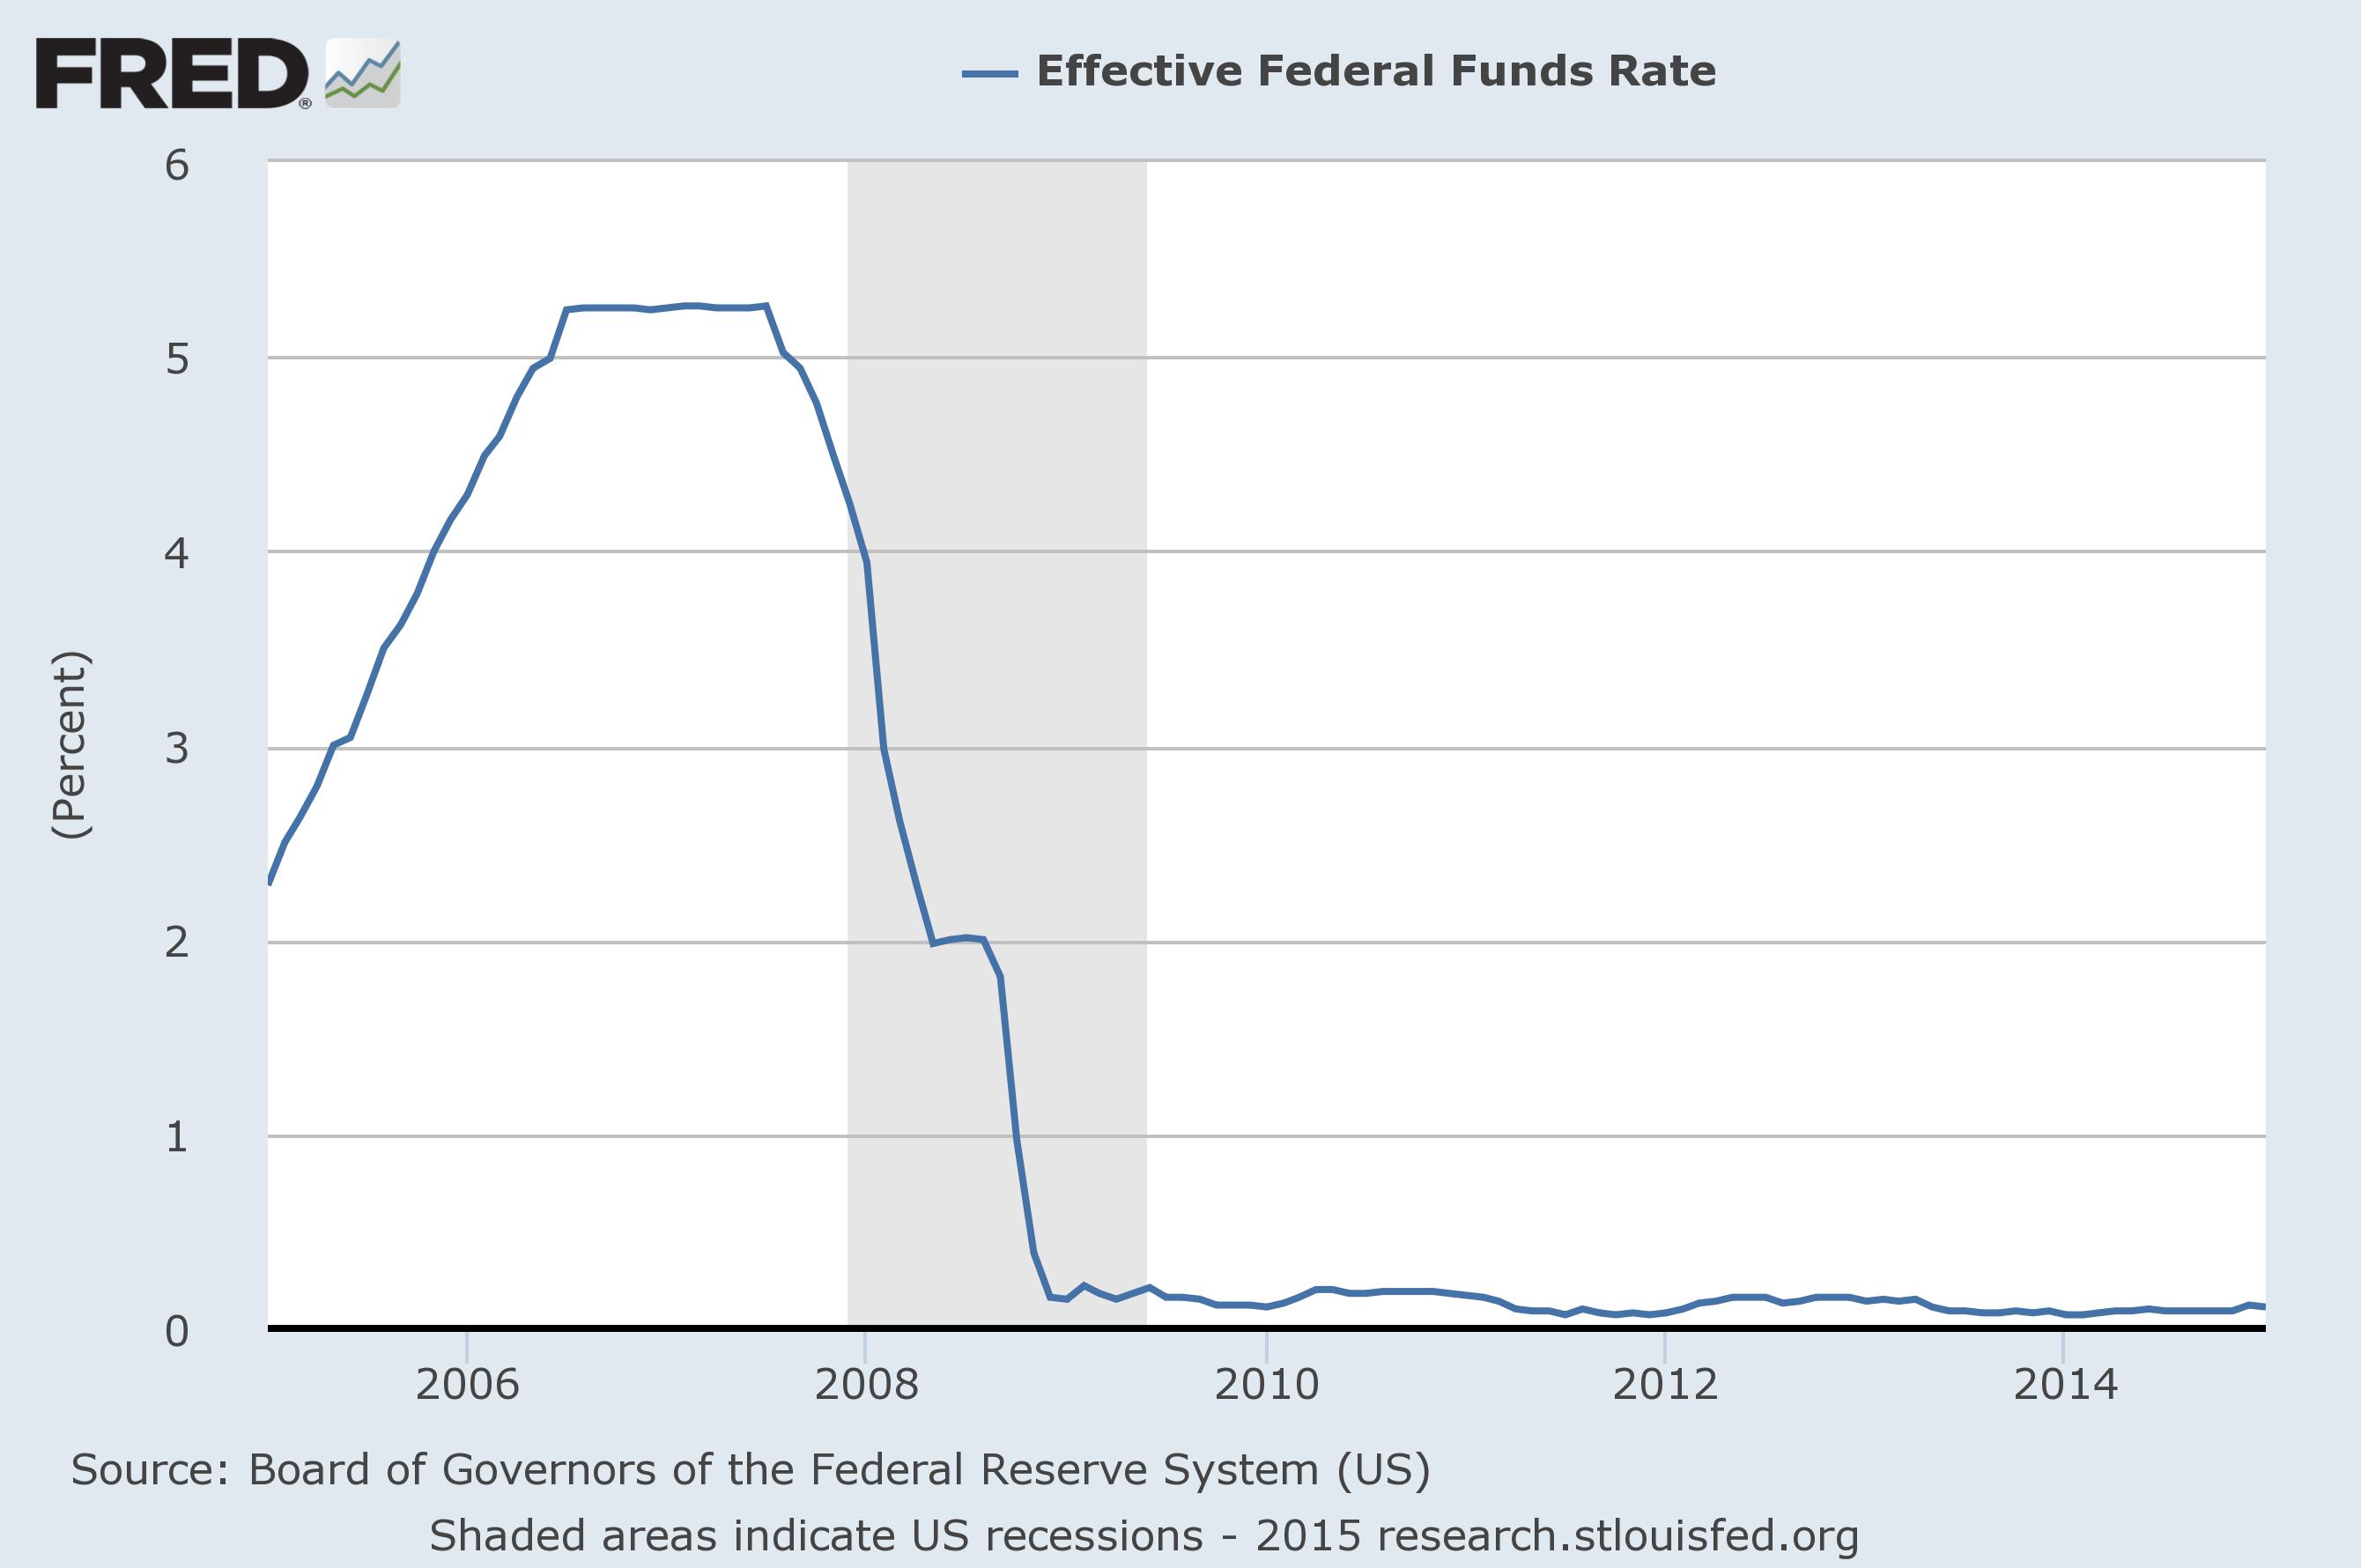 fed funds rate